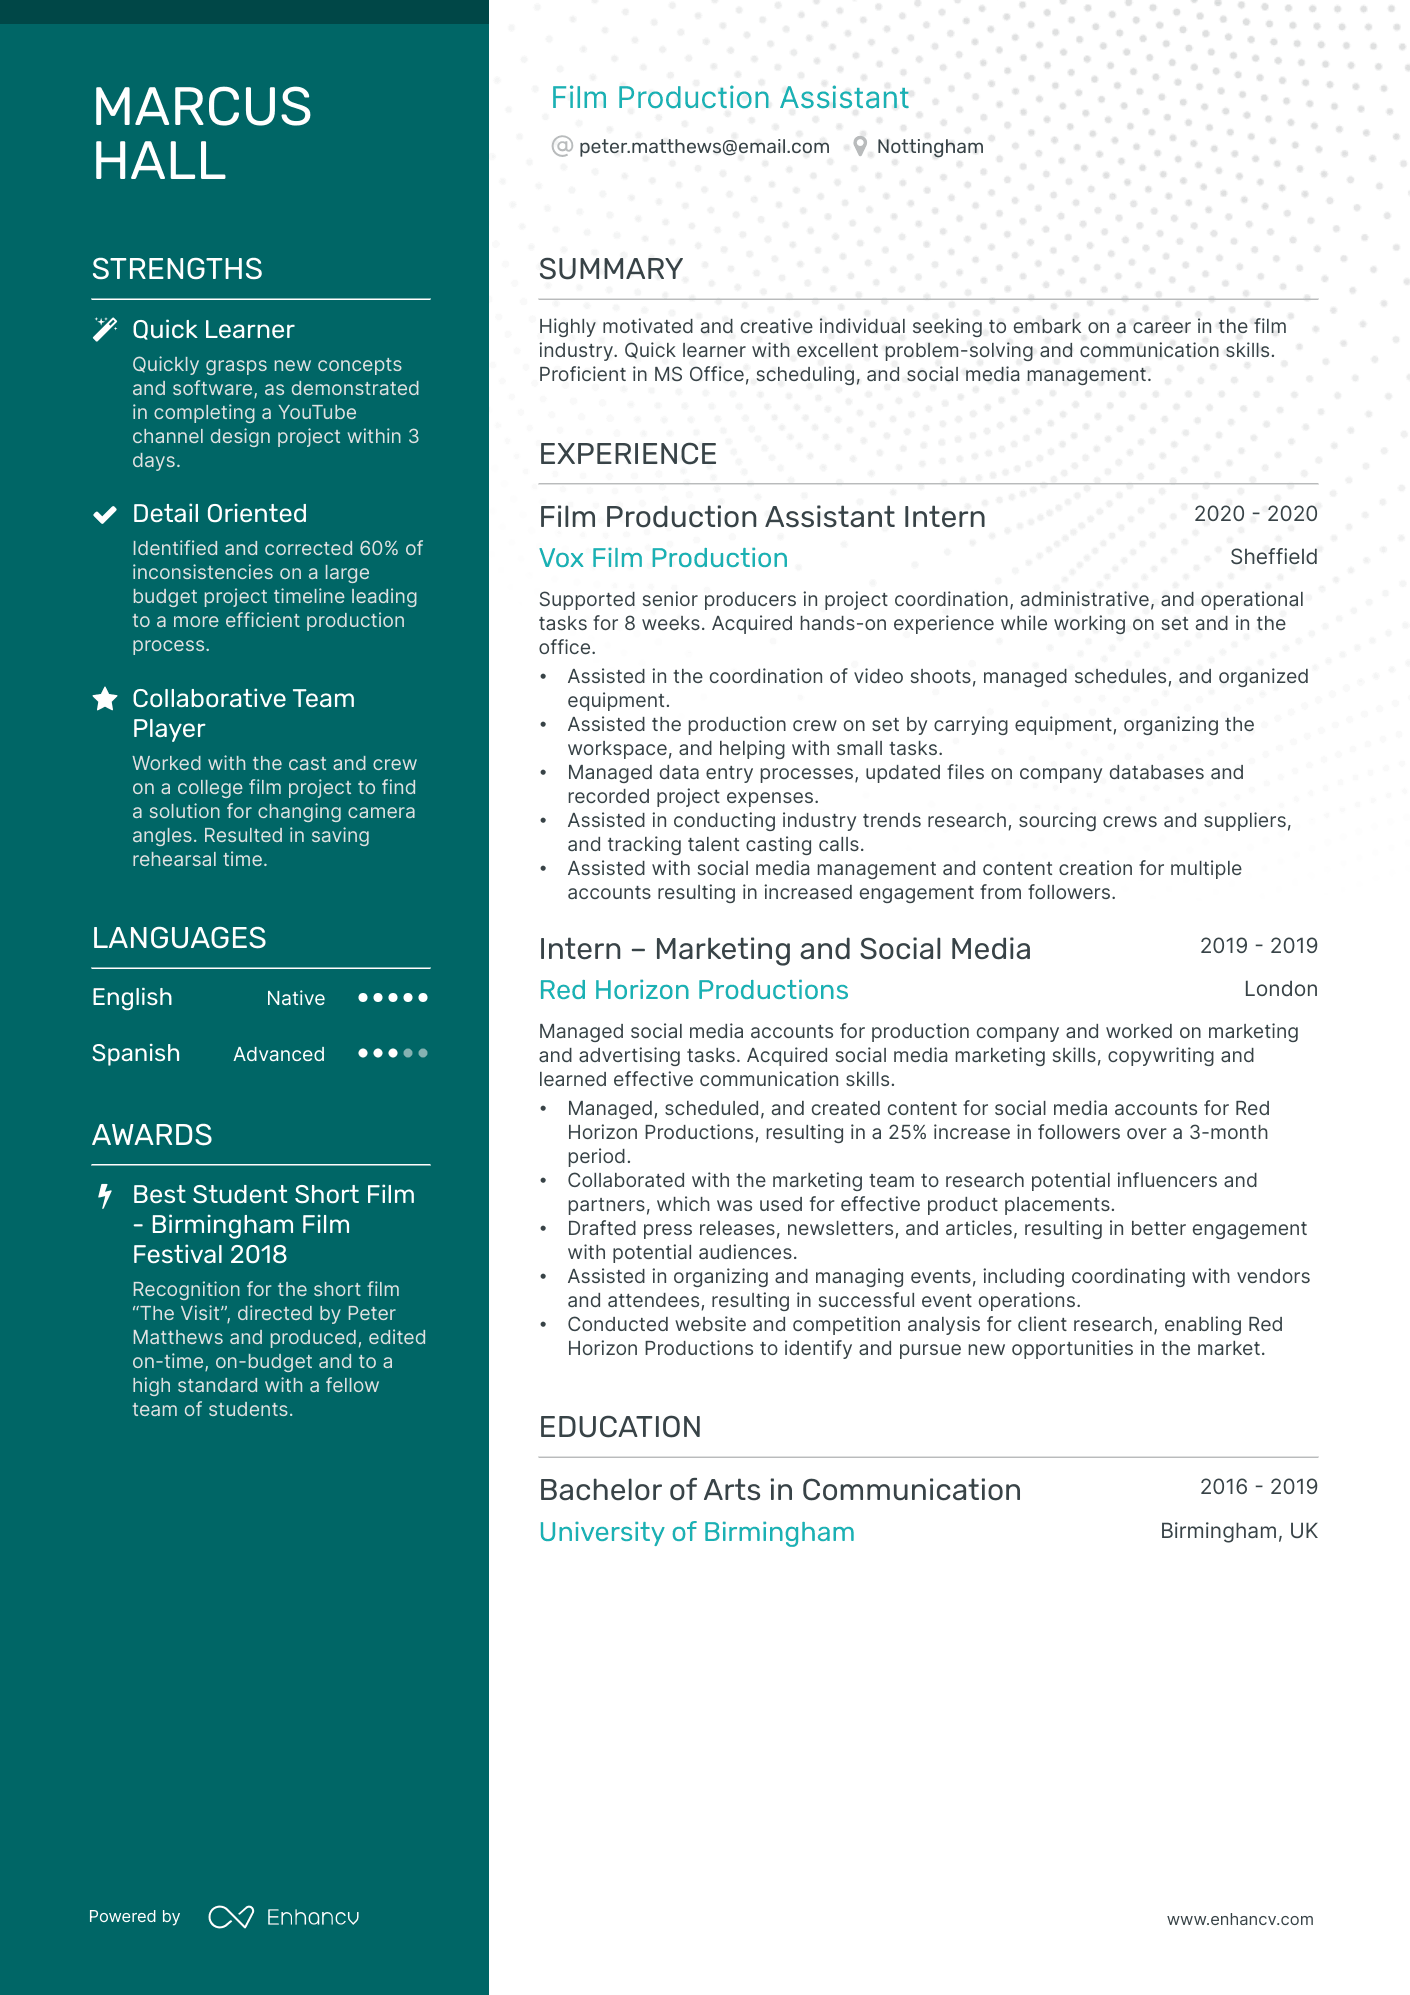 Film Production Assistant CV example